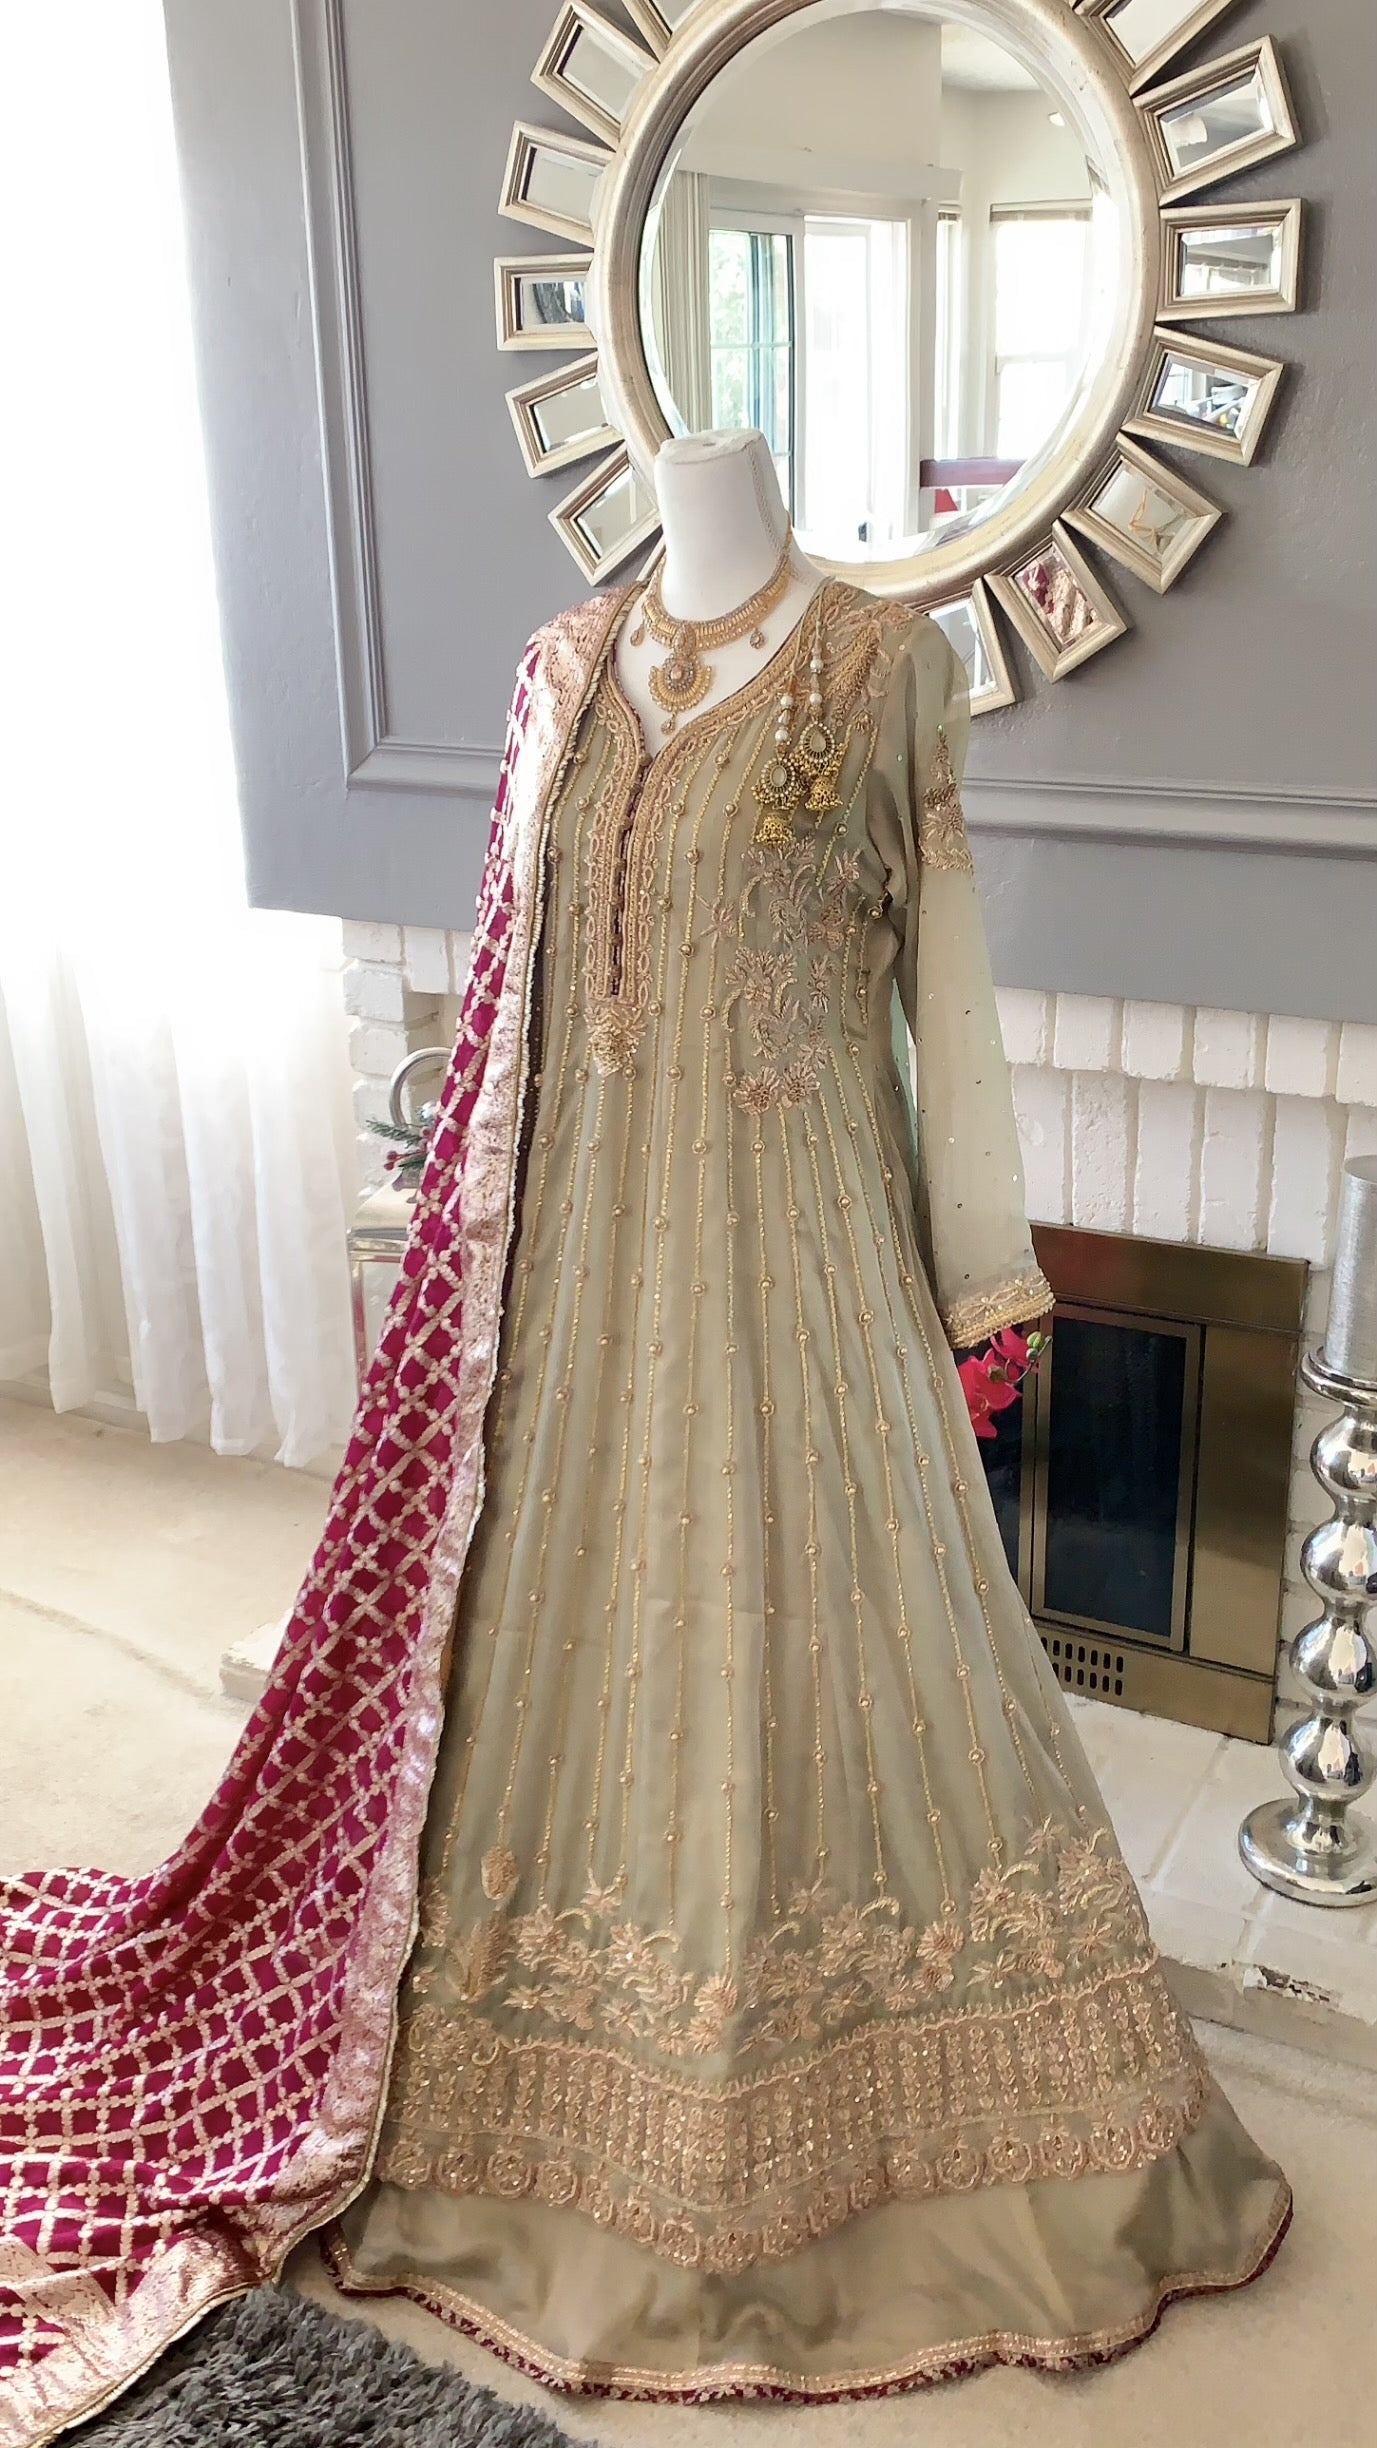 New Indian & Pakistani long Frocks Dress Designs For Girls… | Flickr